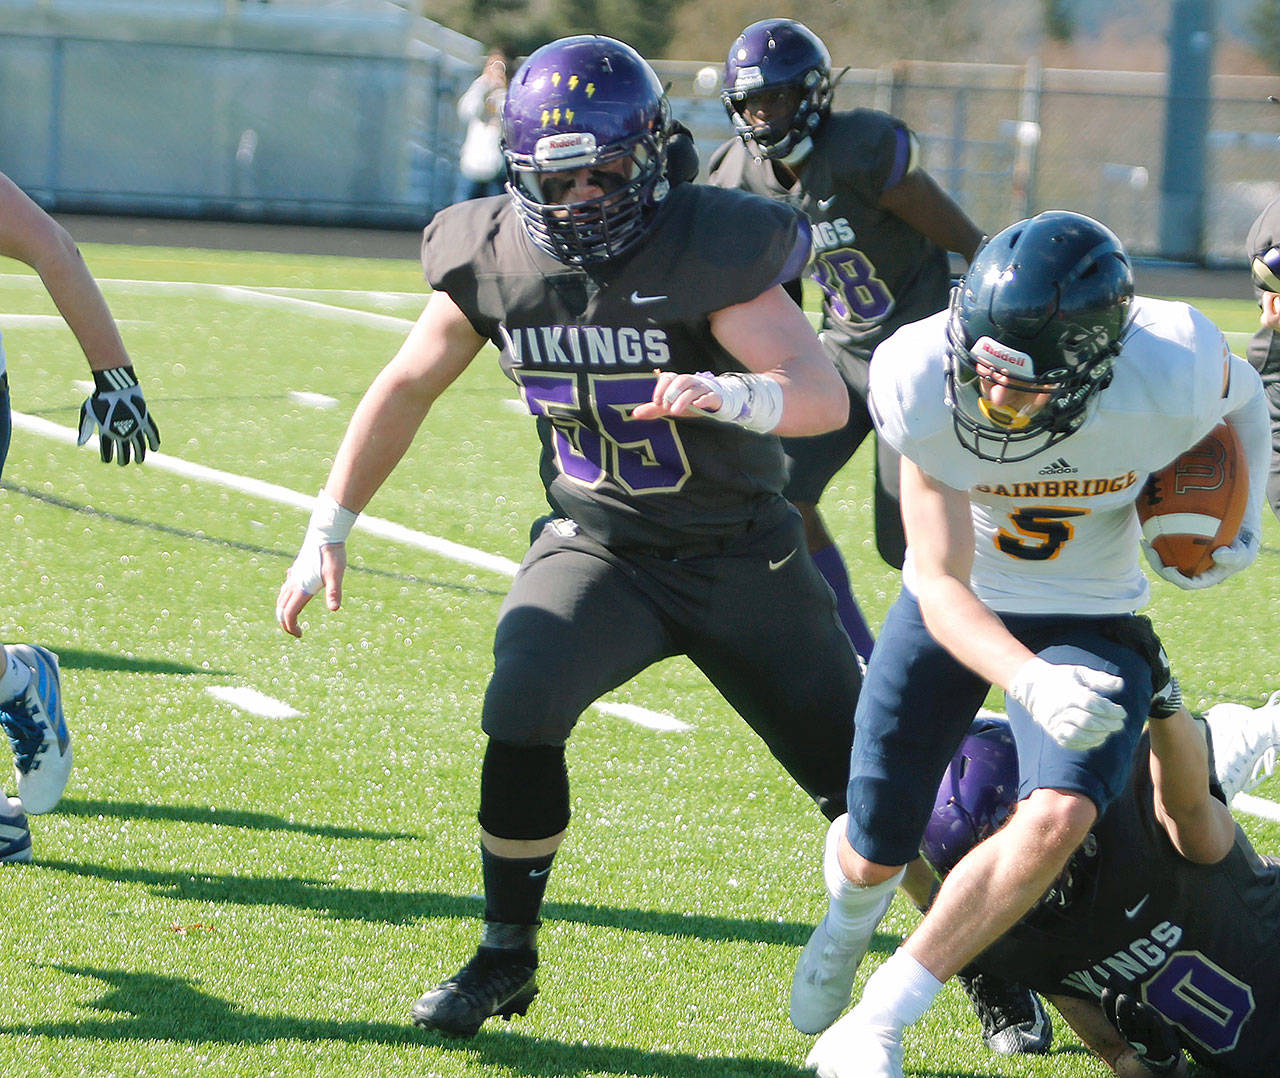 Cache Holmes, shown here chasing down Bainbridge’s Cal Breen, will play football and wrestle at Southern Virginia in the fall. (KNG File Photo)